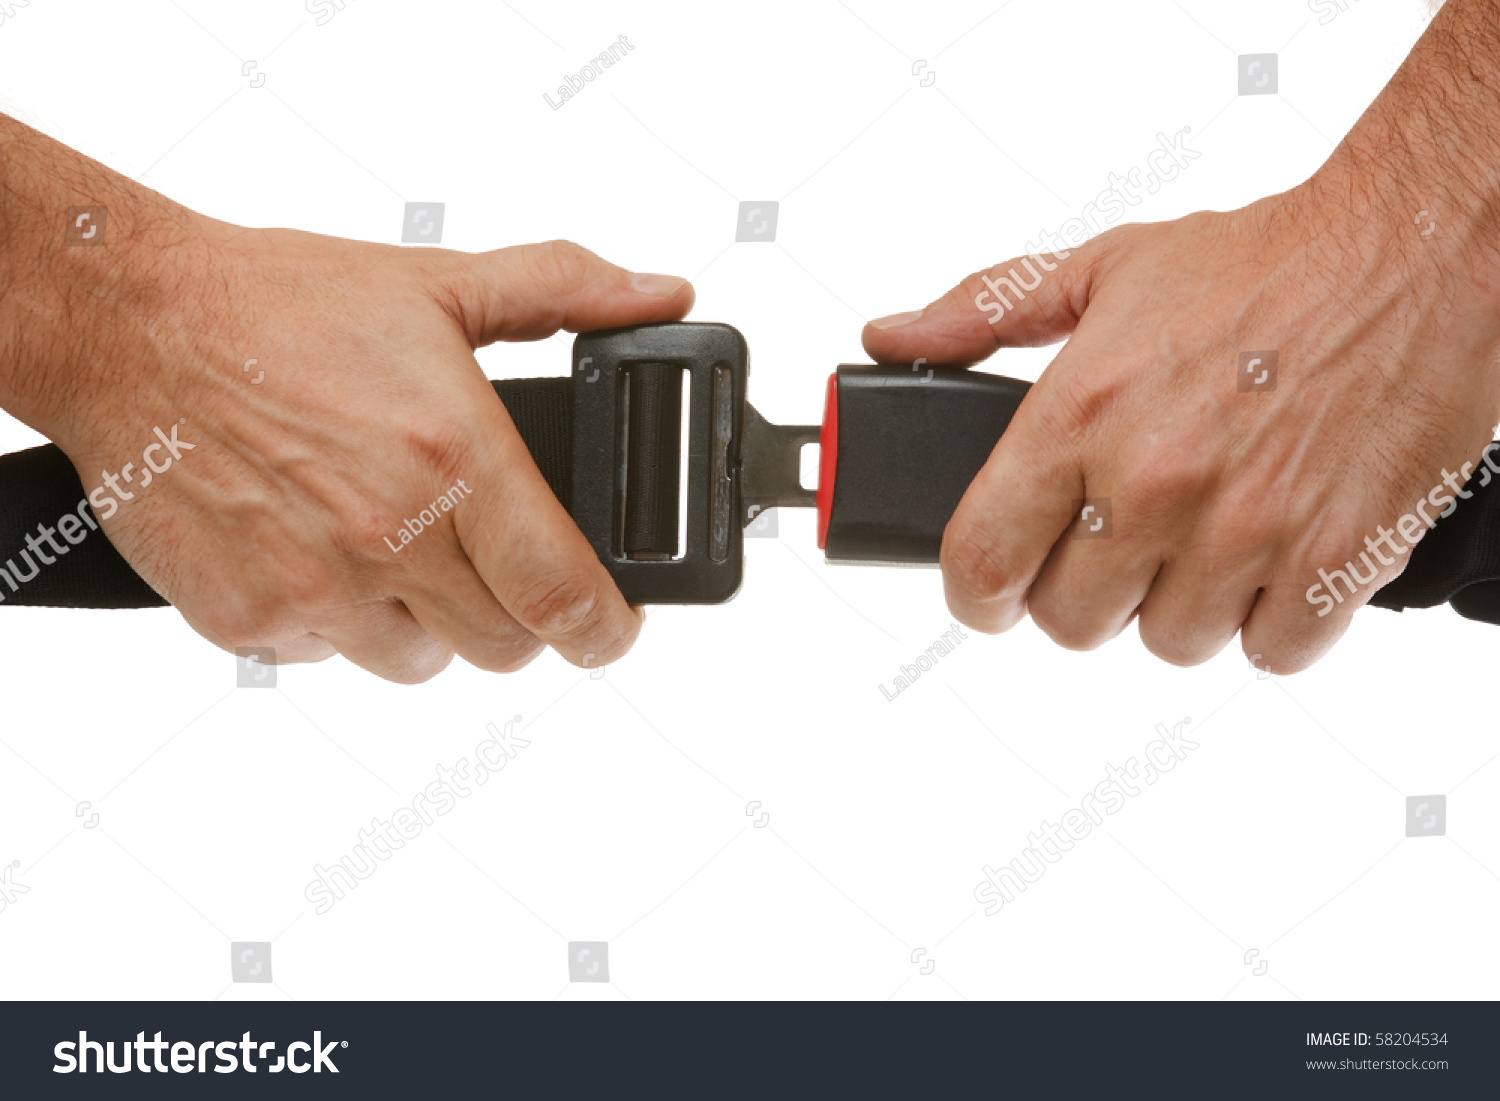 hands button safety belt  isolated on a white background #58204534